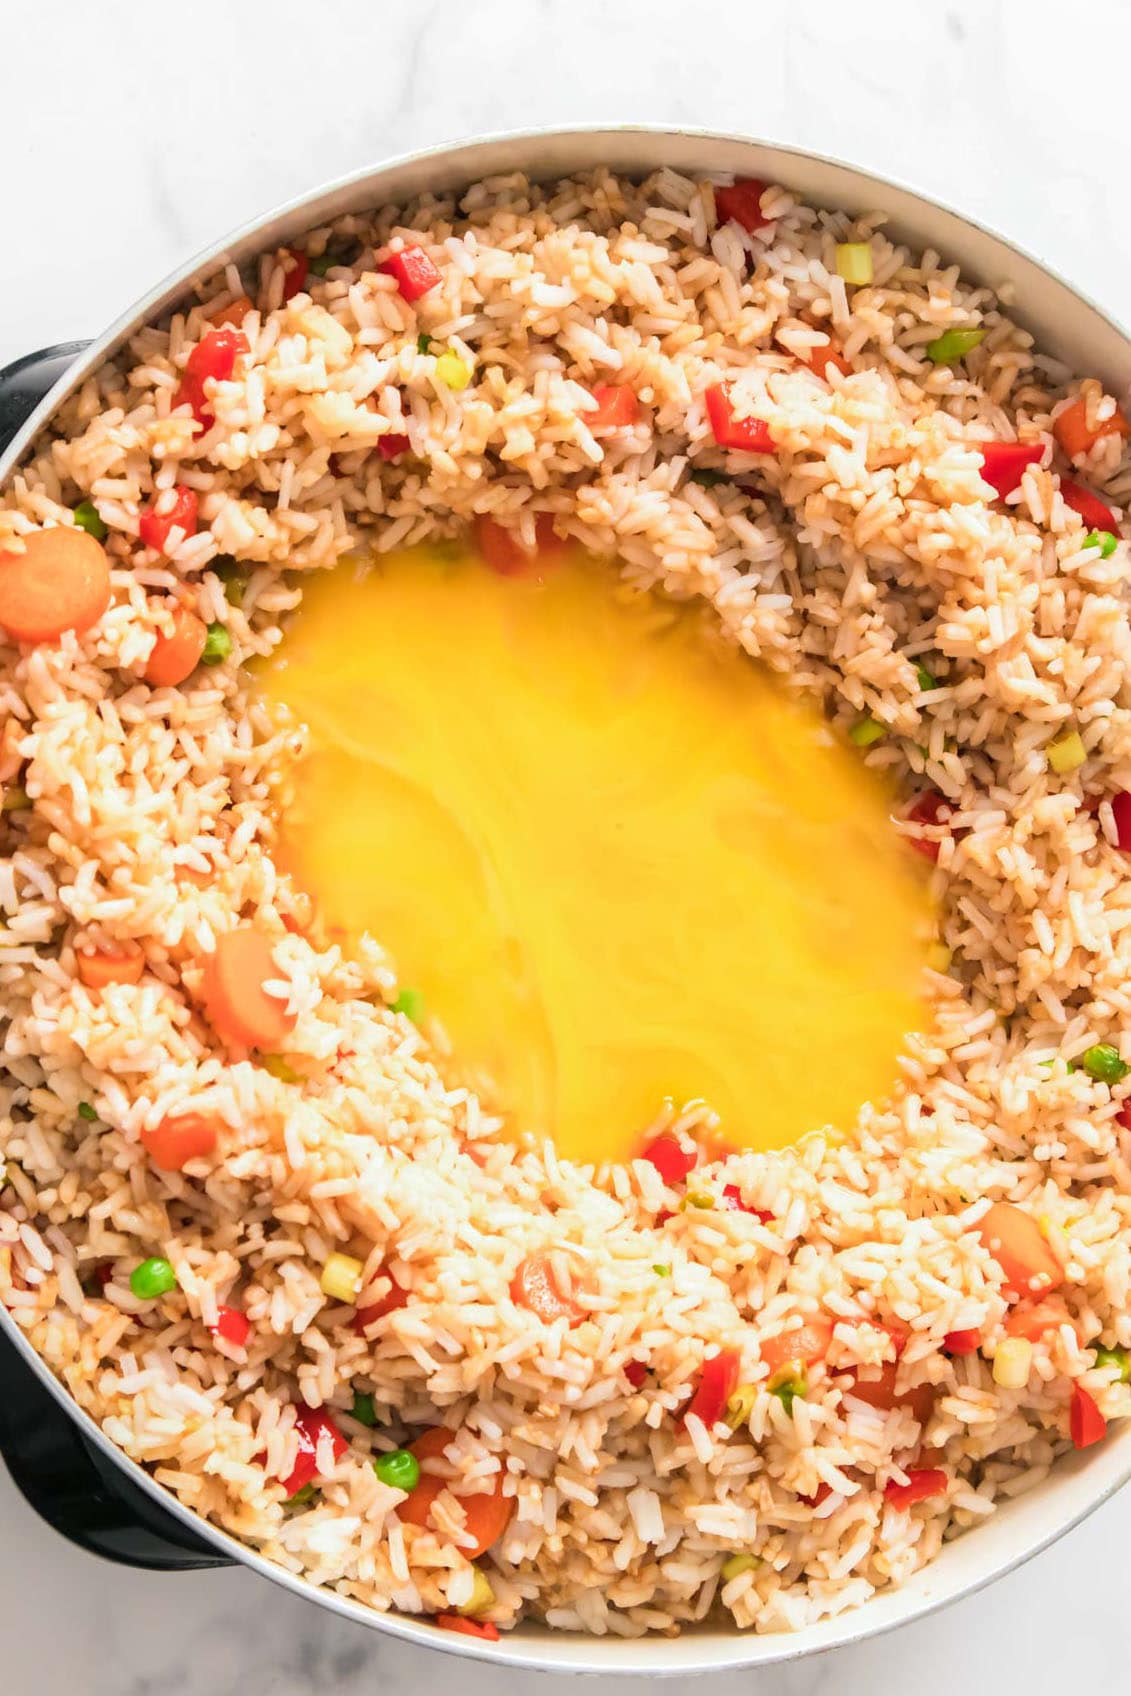 How to make fried rice 4